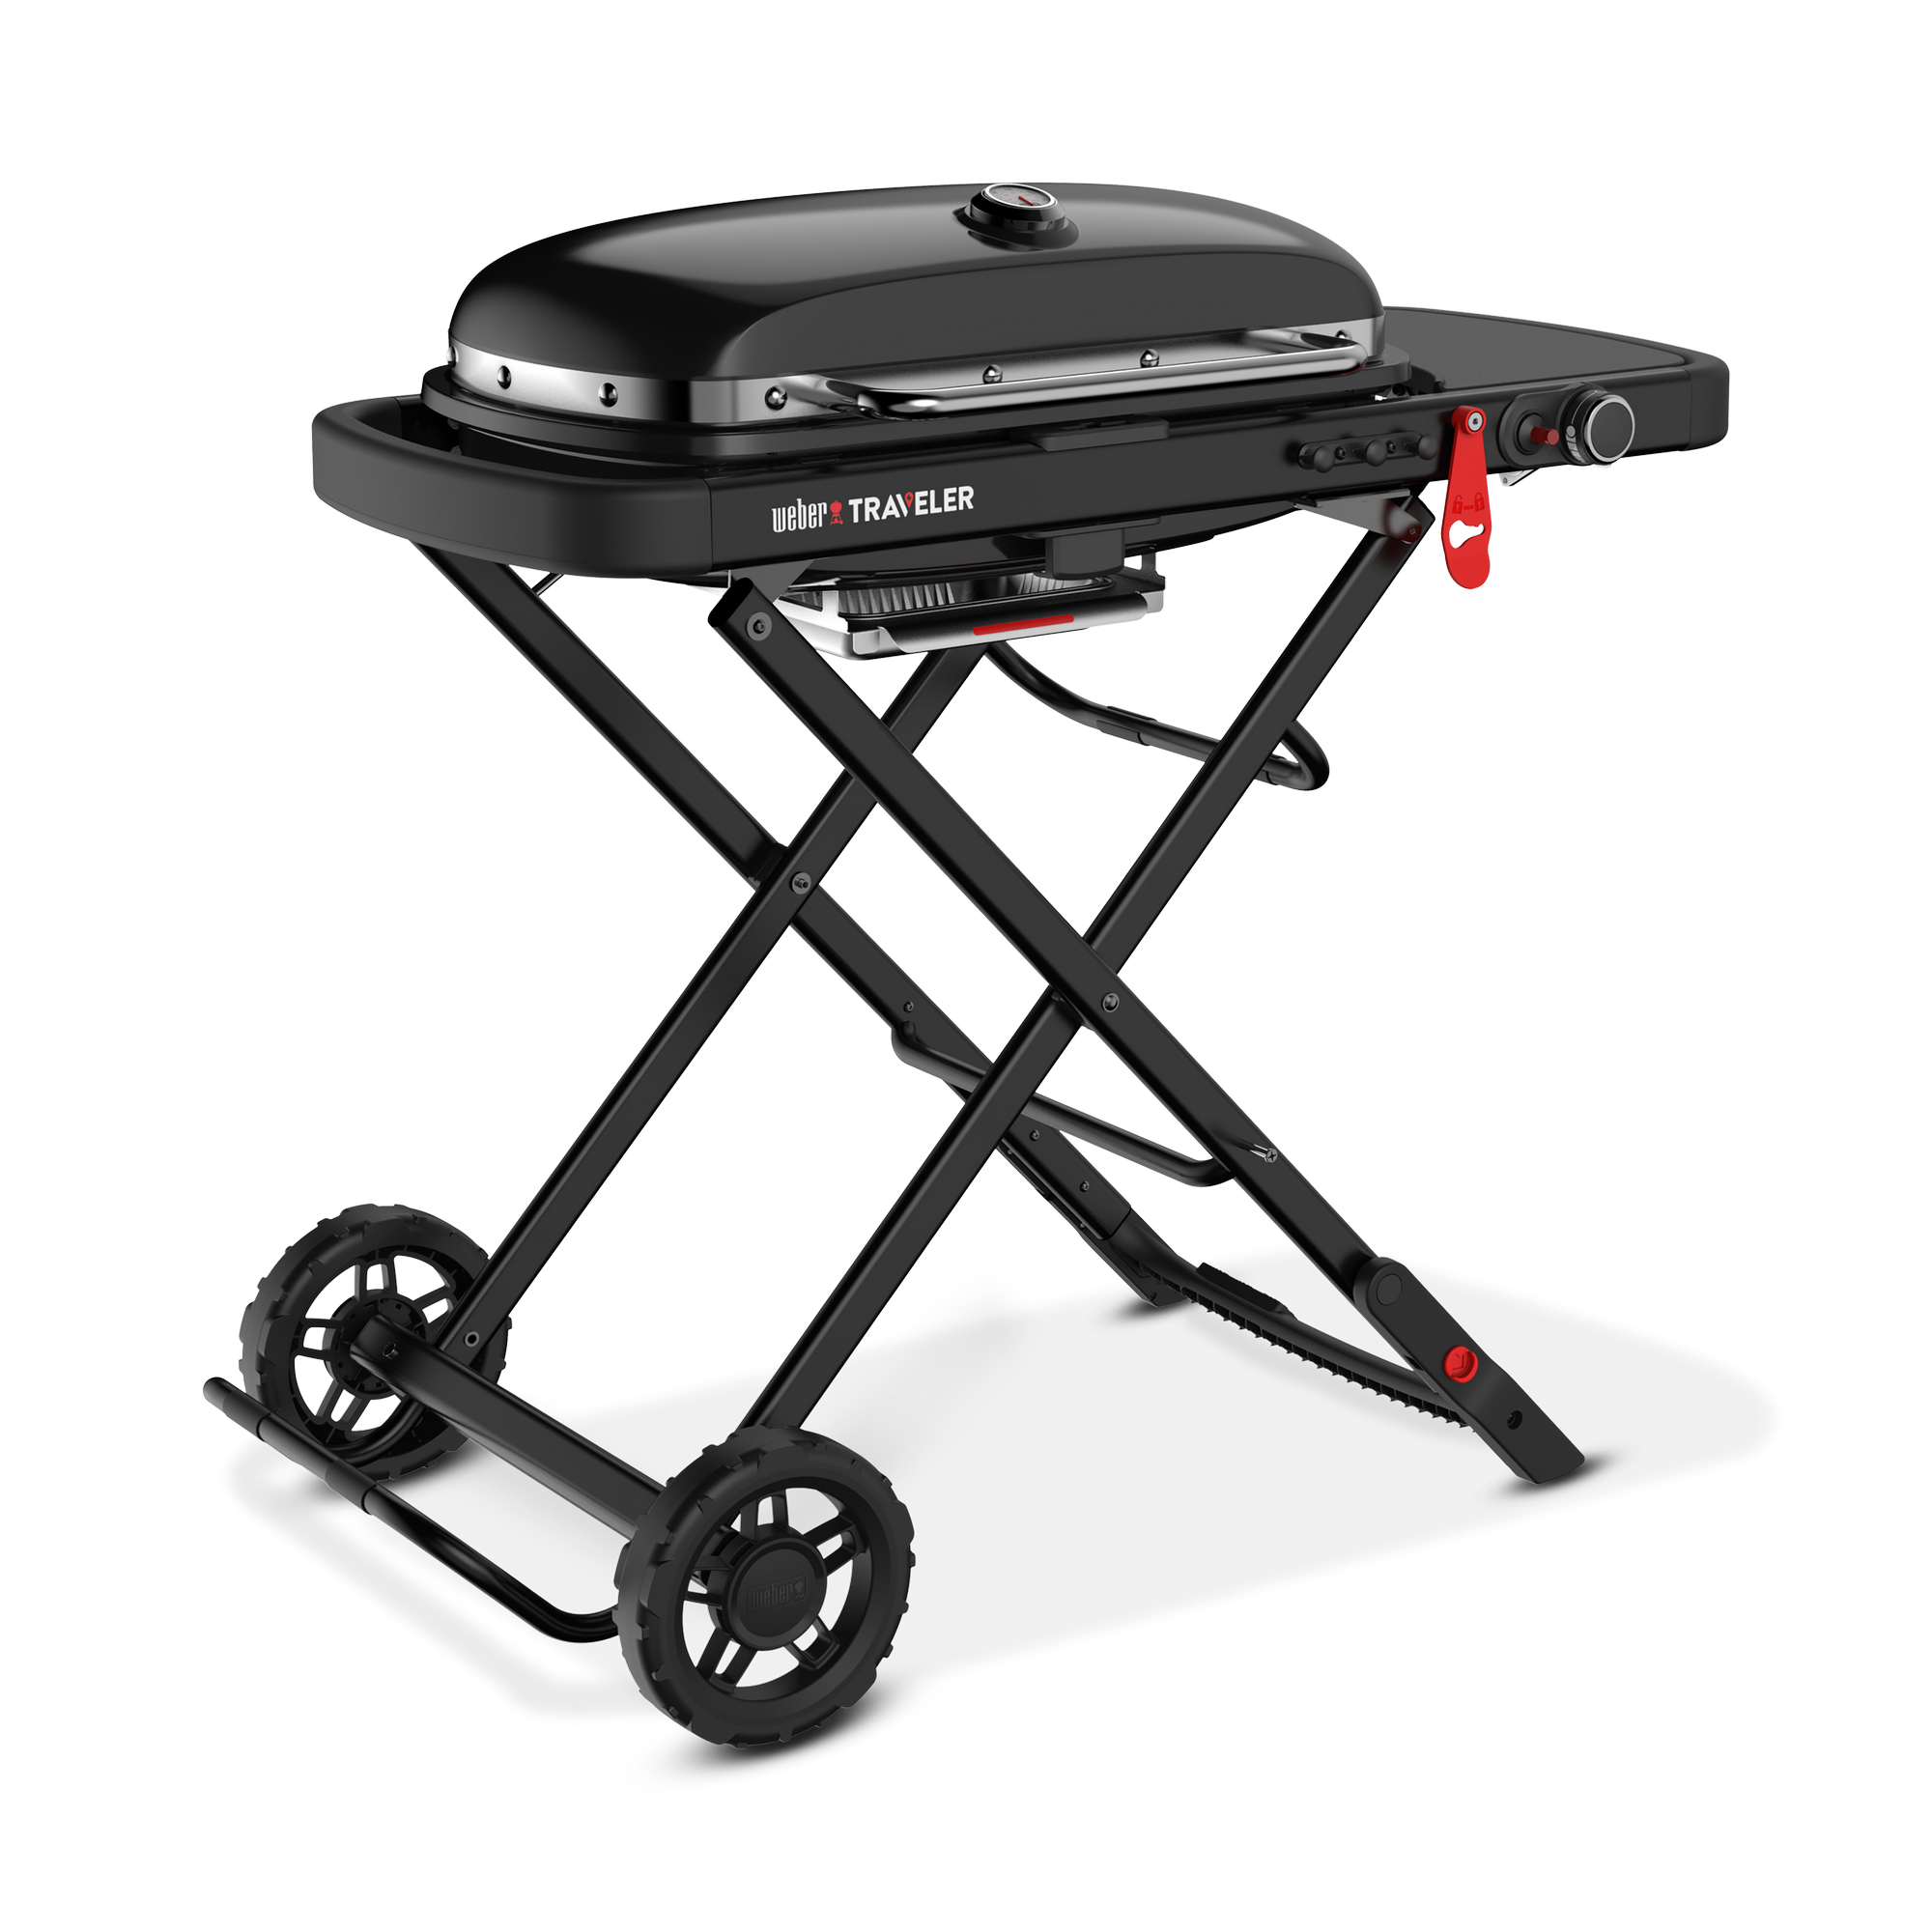 Gasgrill 'Traveler, Stealth Edition' 110,8 x 94,5 x 58,4 cm + product picture